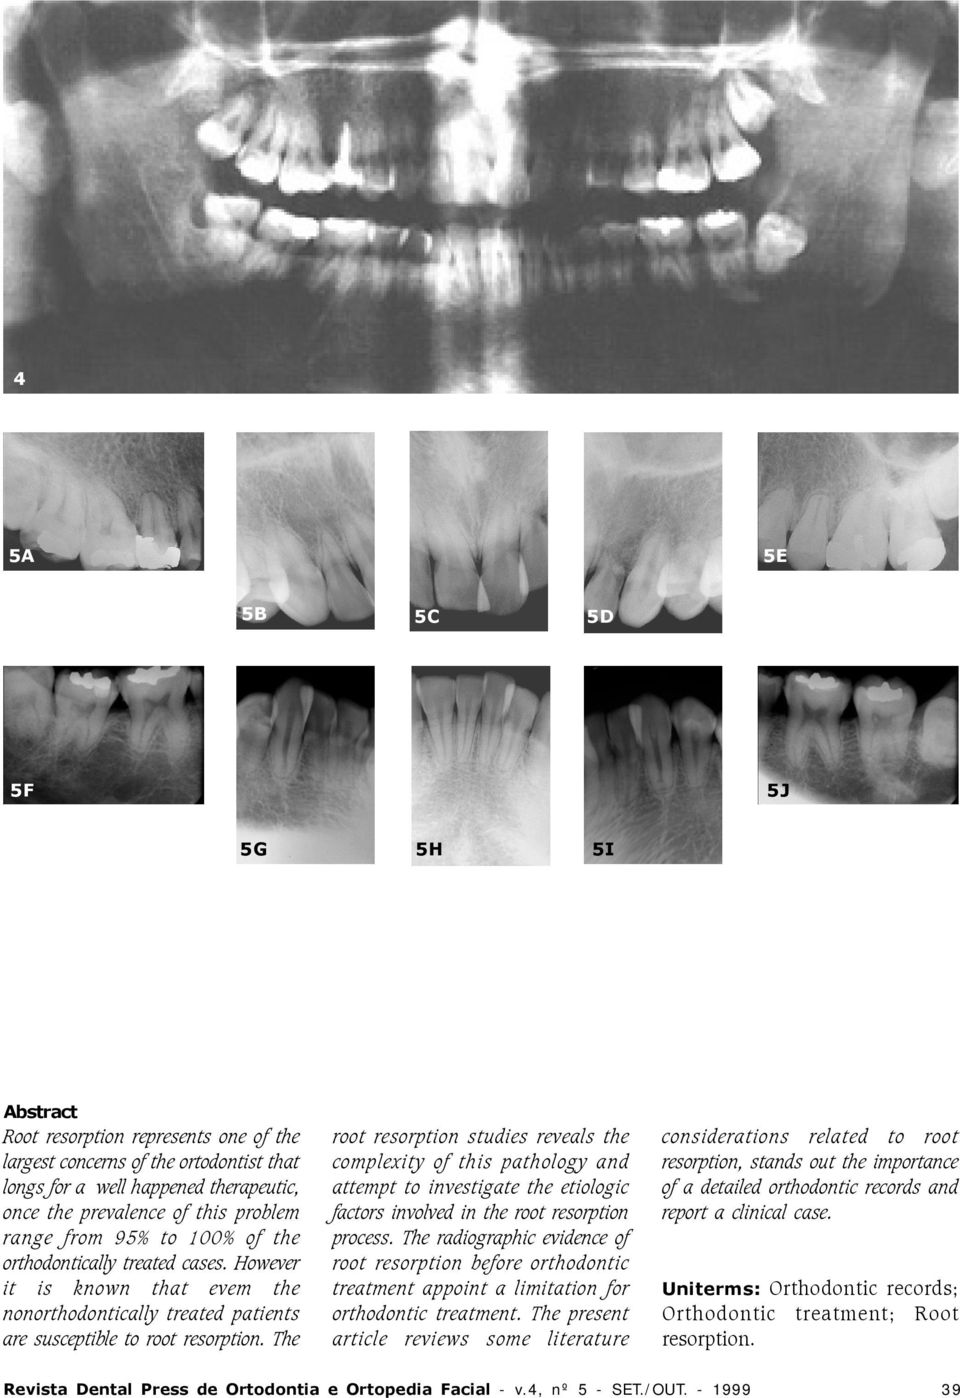 The root resorption studies reveals the complexity of this pathology and attempt to investigate the etiologic factors involved in the root resorption process.